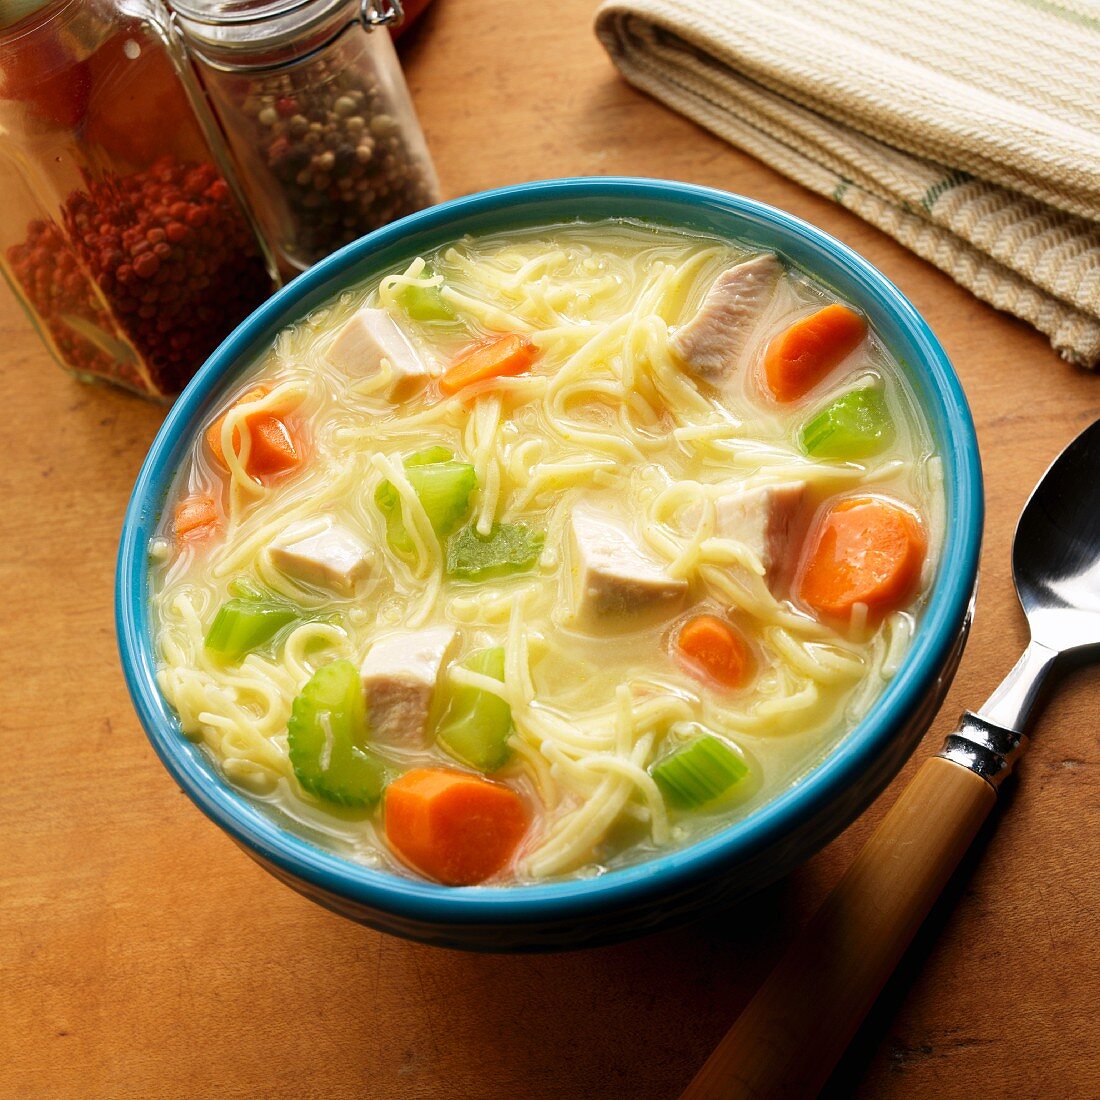 Chicken soup with egg noodles, celery and carrots